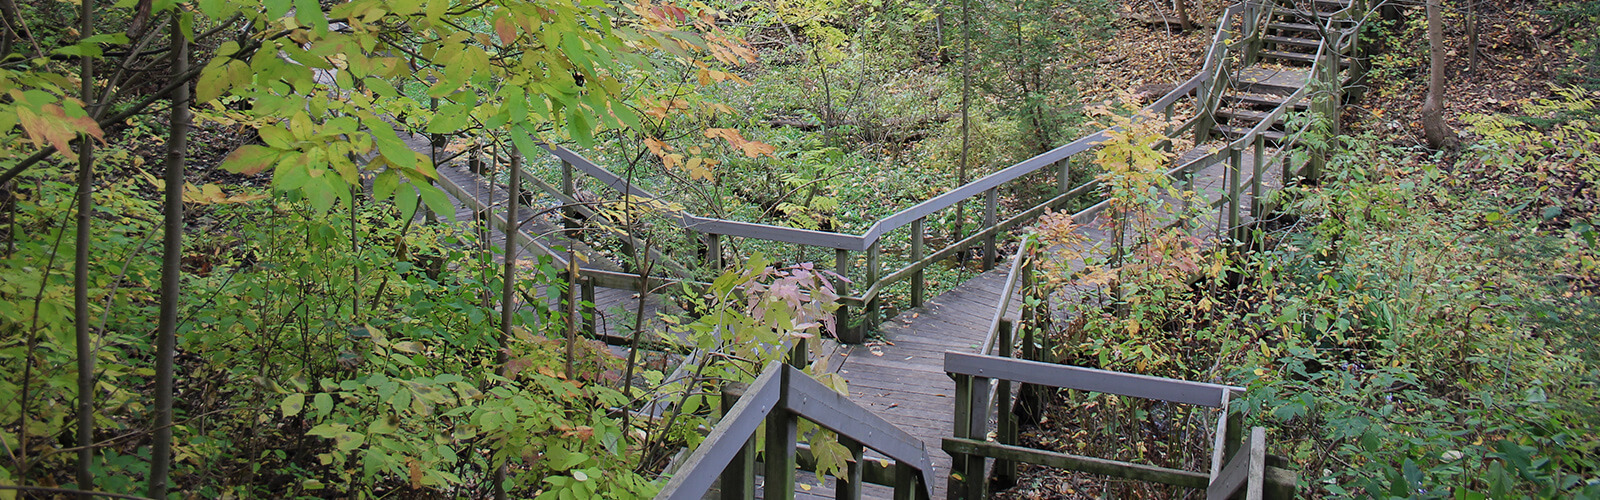 A lush ravine with wooden stairs